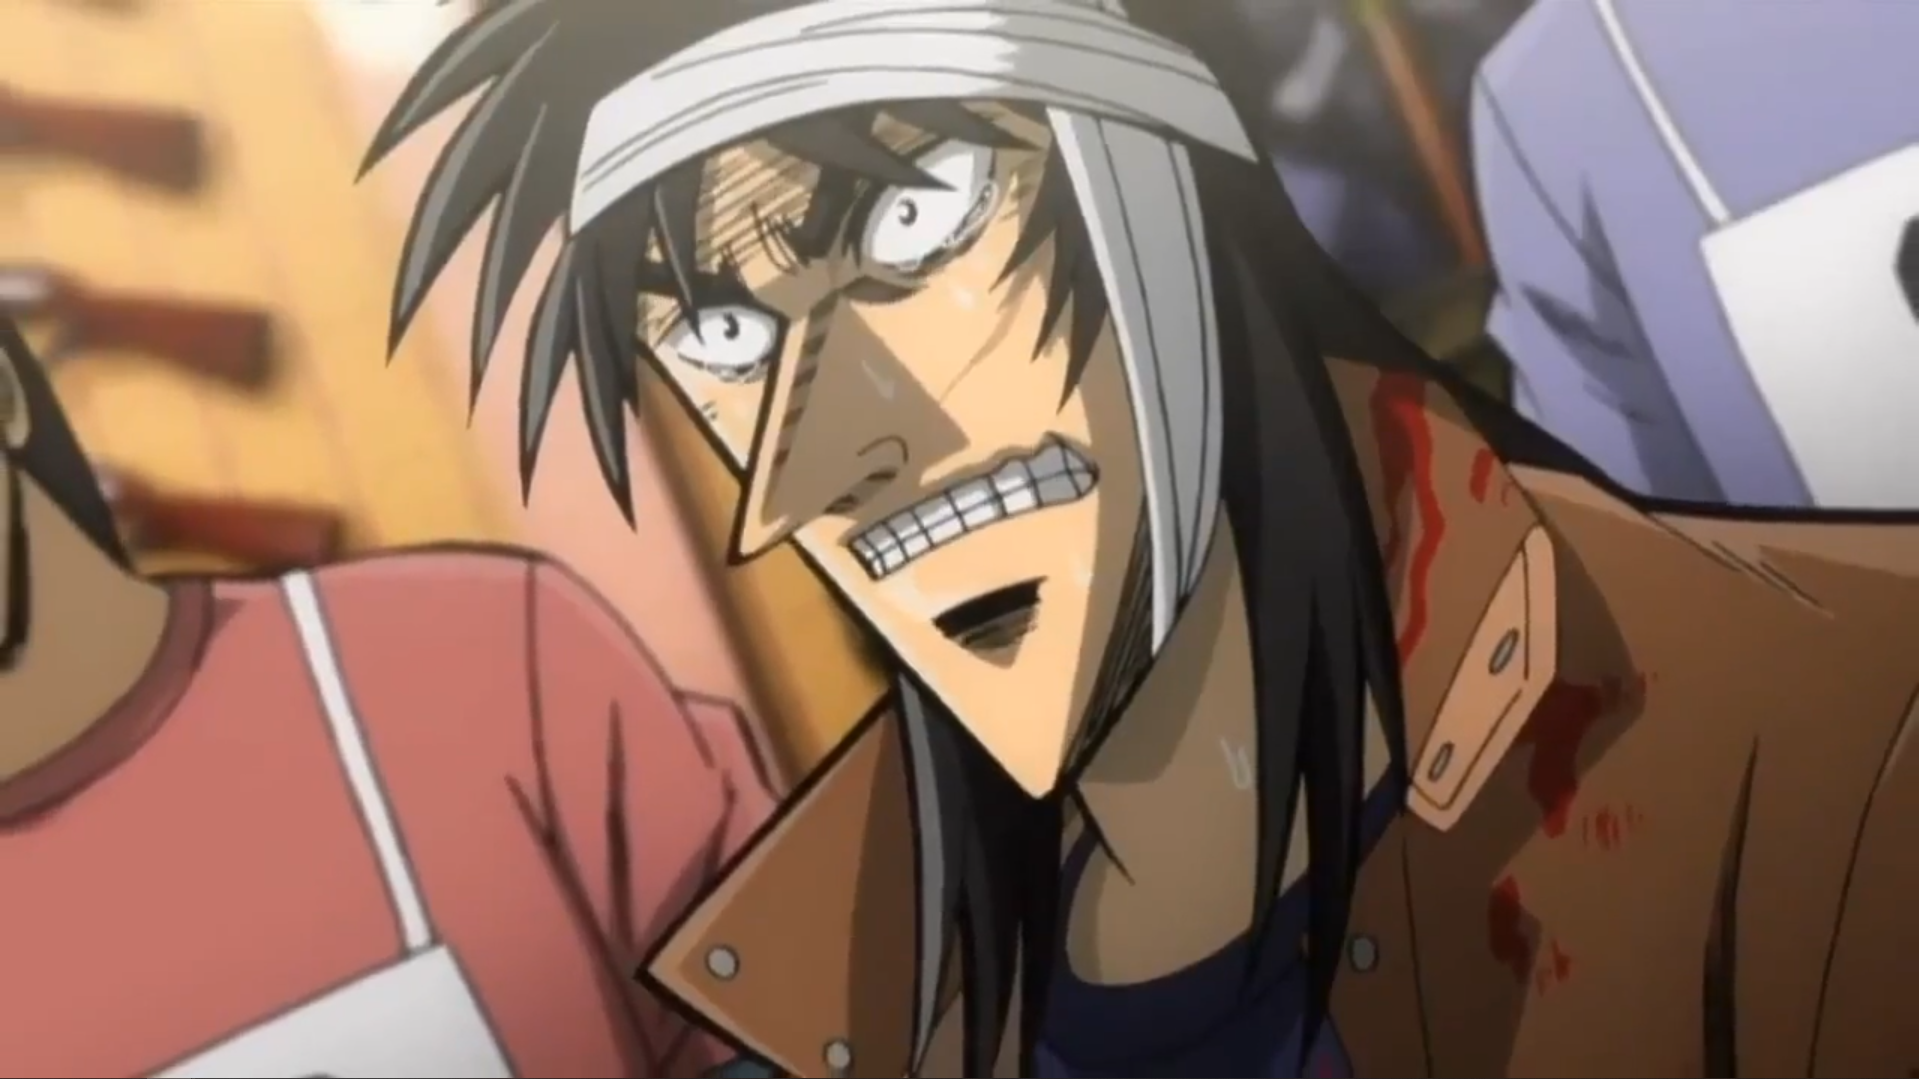 Kaiji tears up with stress, his coat is bloodied and his head is wrapped with bandages.